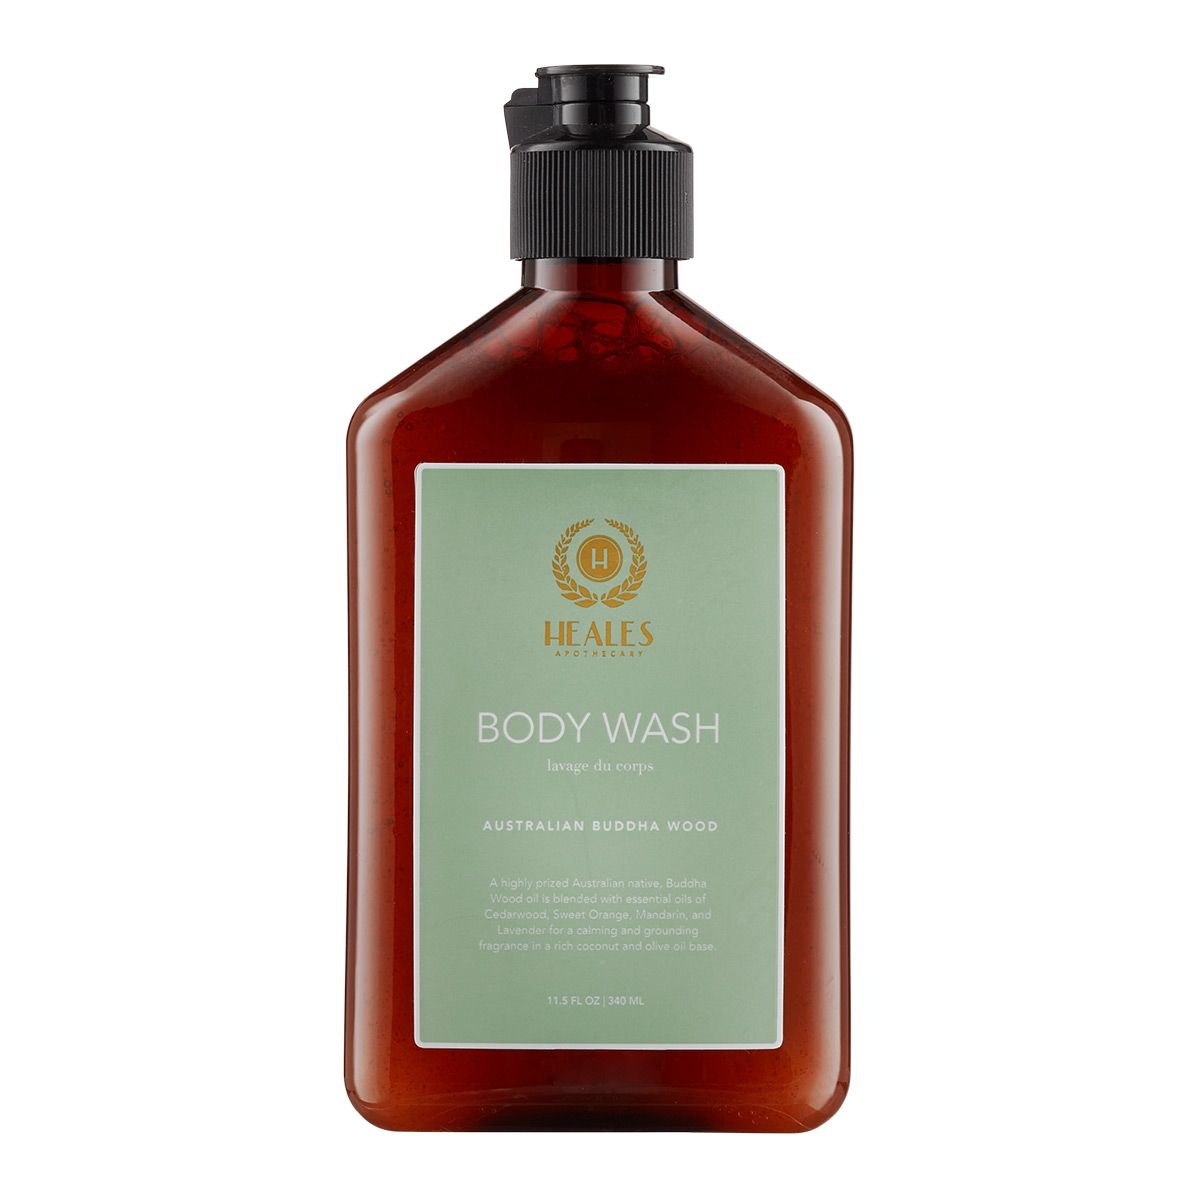 Heales Apothecary 11.5 oz. Body Wash Australian Buddha Wood | The Container Store